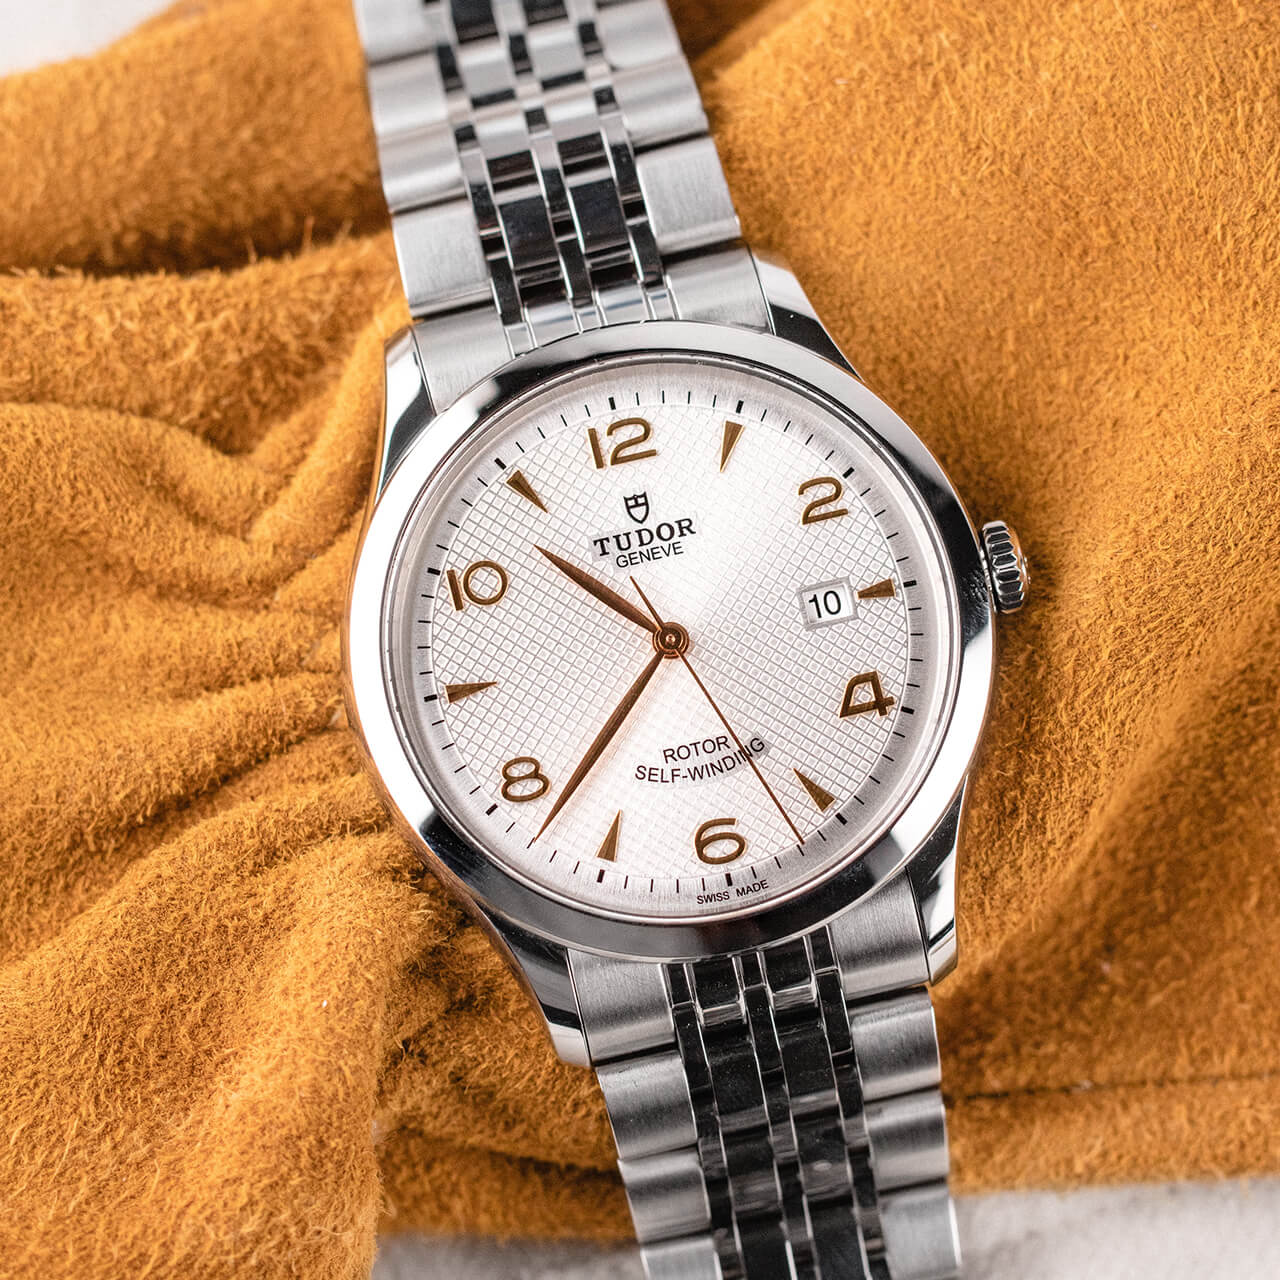 A M91651-0012 watch sitting on a yellow blanket.